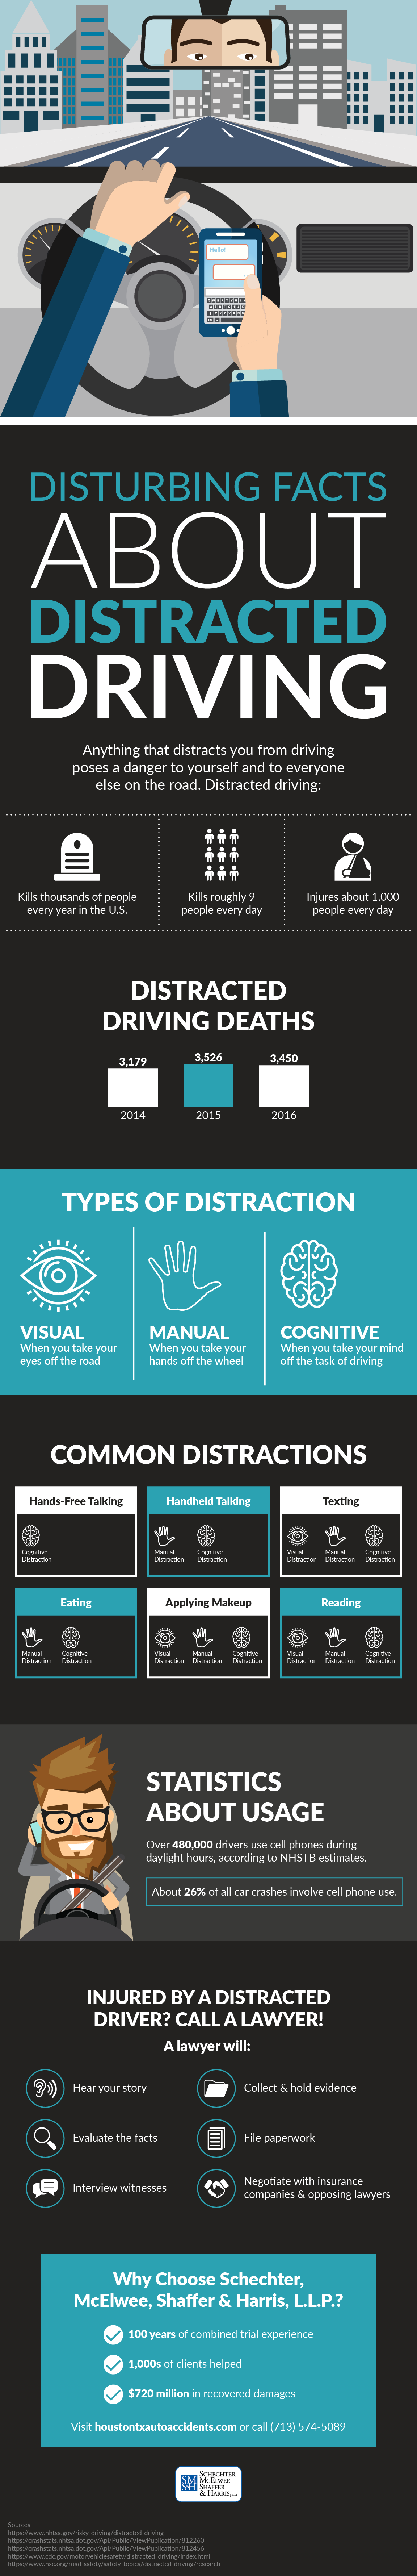 Disturbing Facts About Distracted Driving